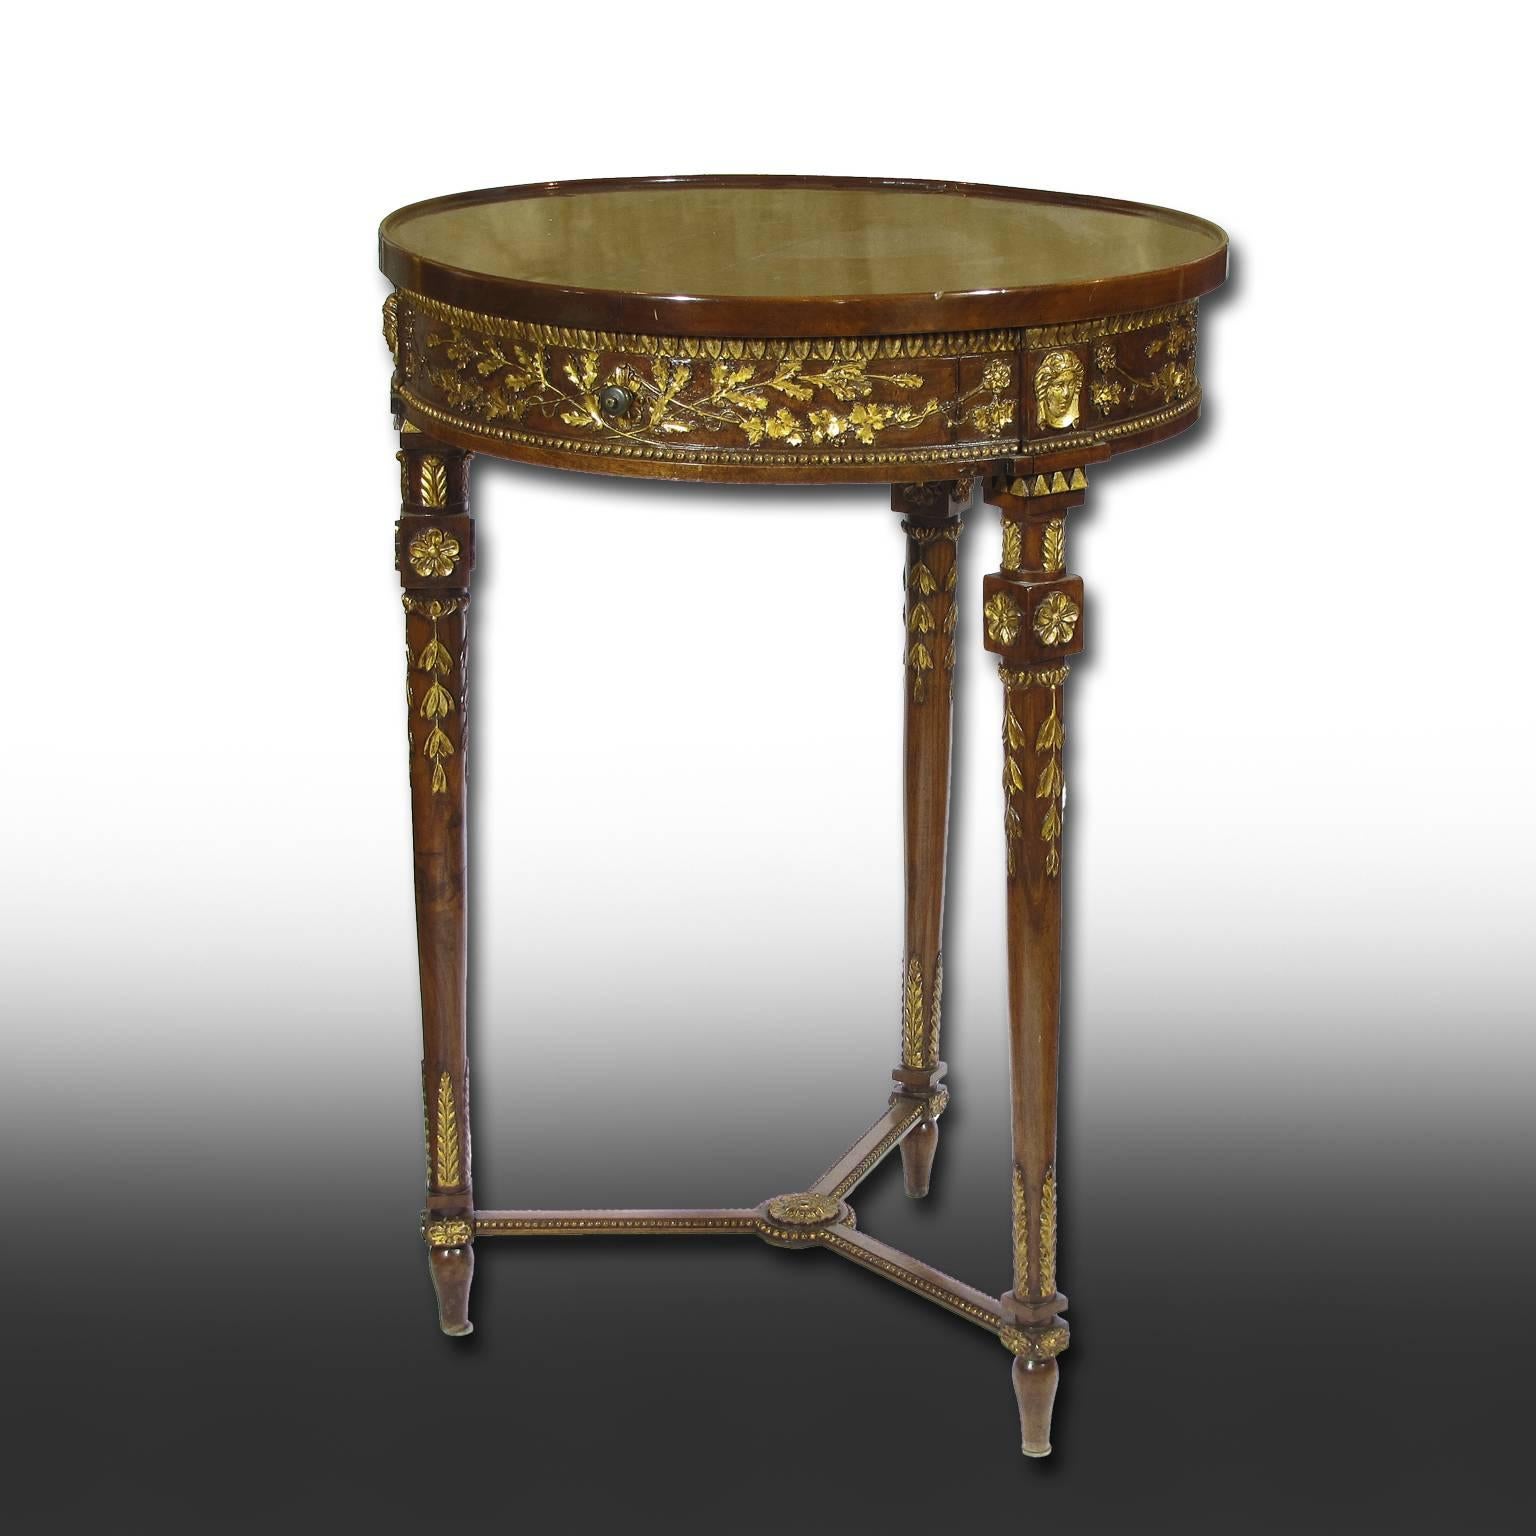 A small circular Louis XVI solid walnut wood table with three slender legs and one drawer.
A refined gilt foliage frieze adorns the tabletop and the legs.
An elegant piece of furniture, beautifully carved and polished with shellac.
Central Italy,